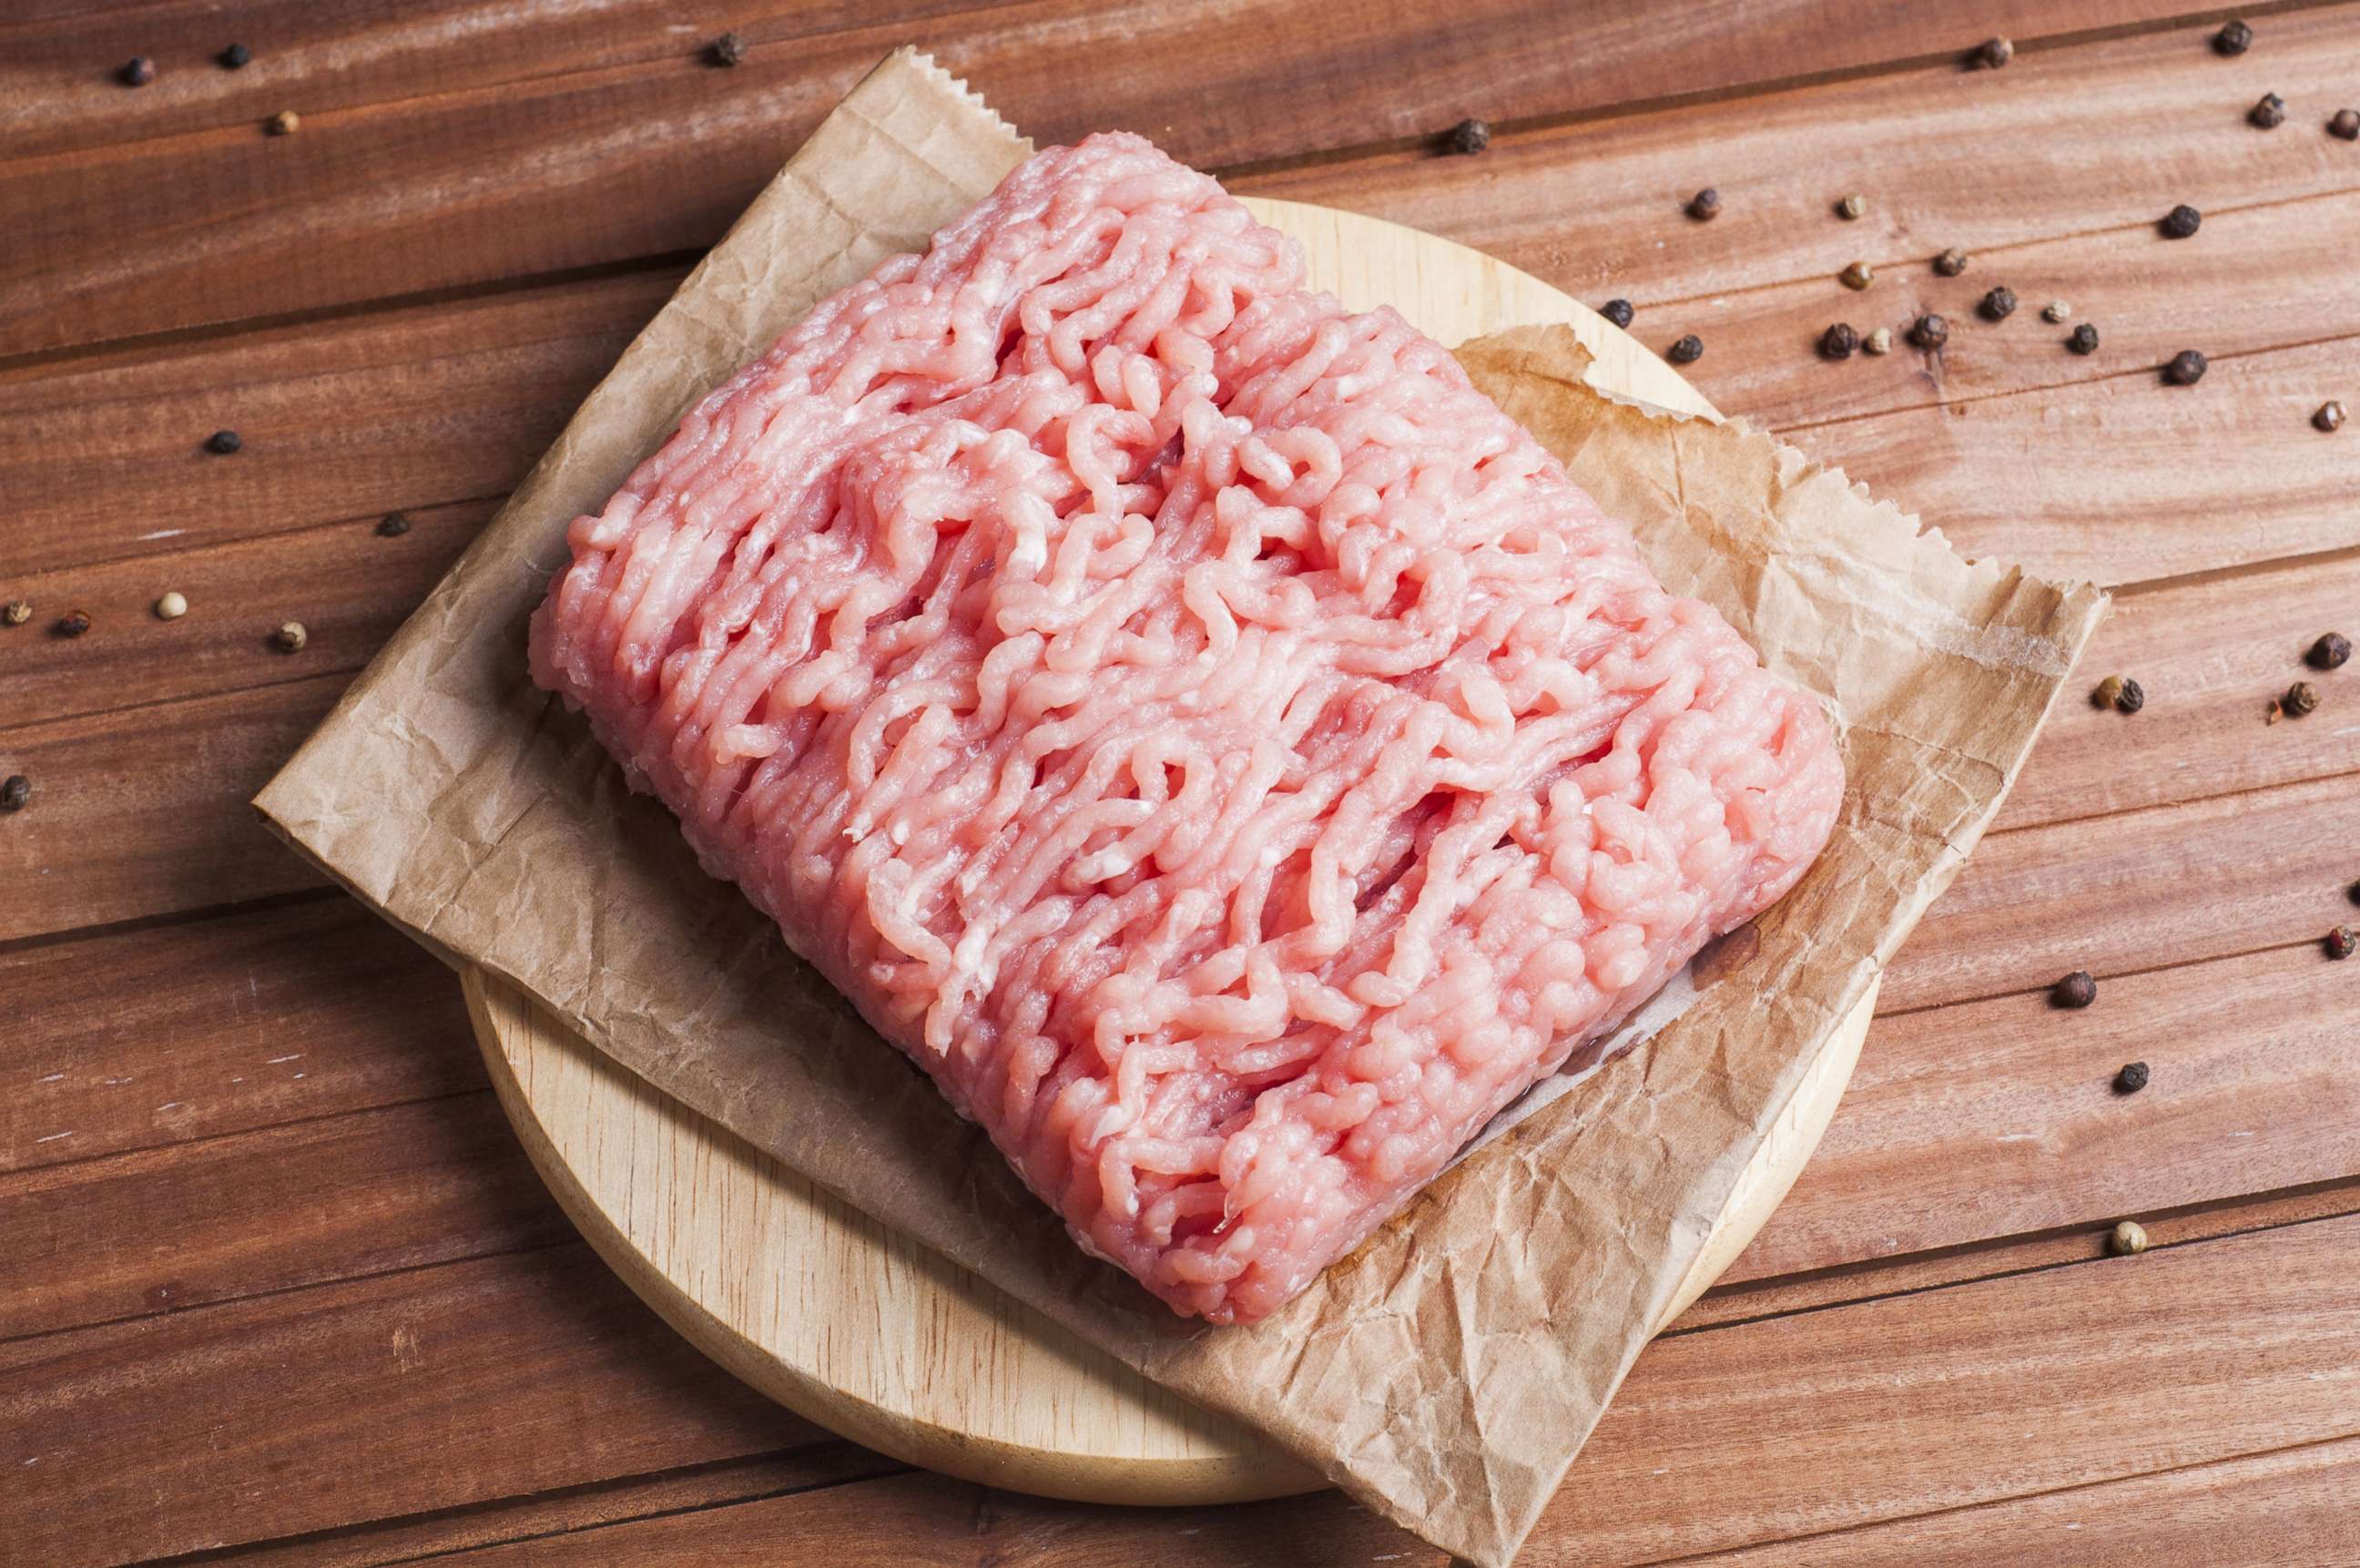 PHOTO: Raw ground turkey meat is pictured in this undated stock photo.